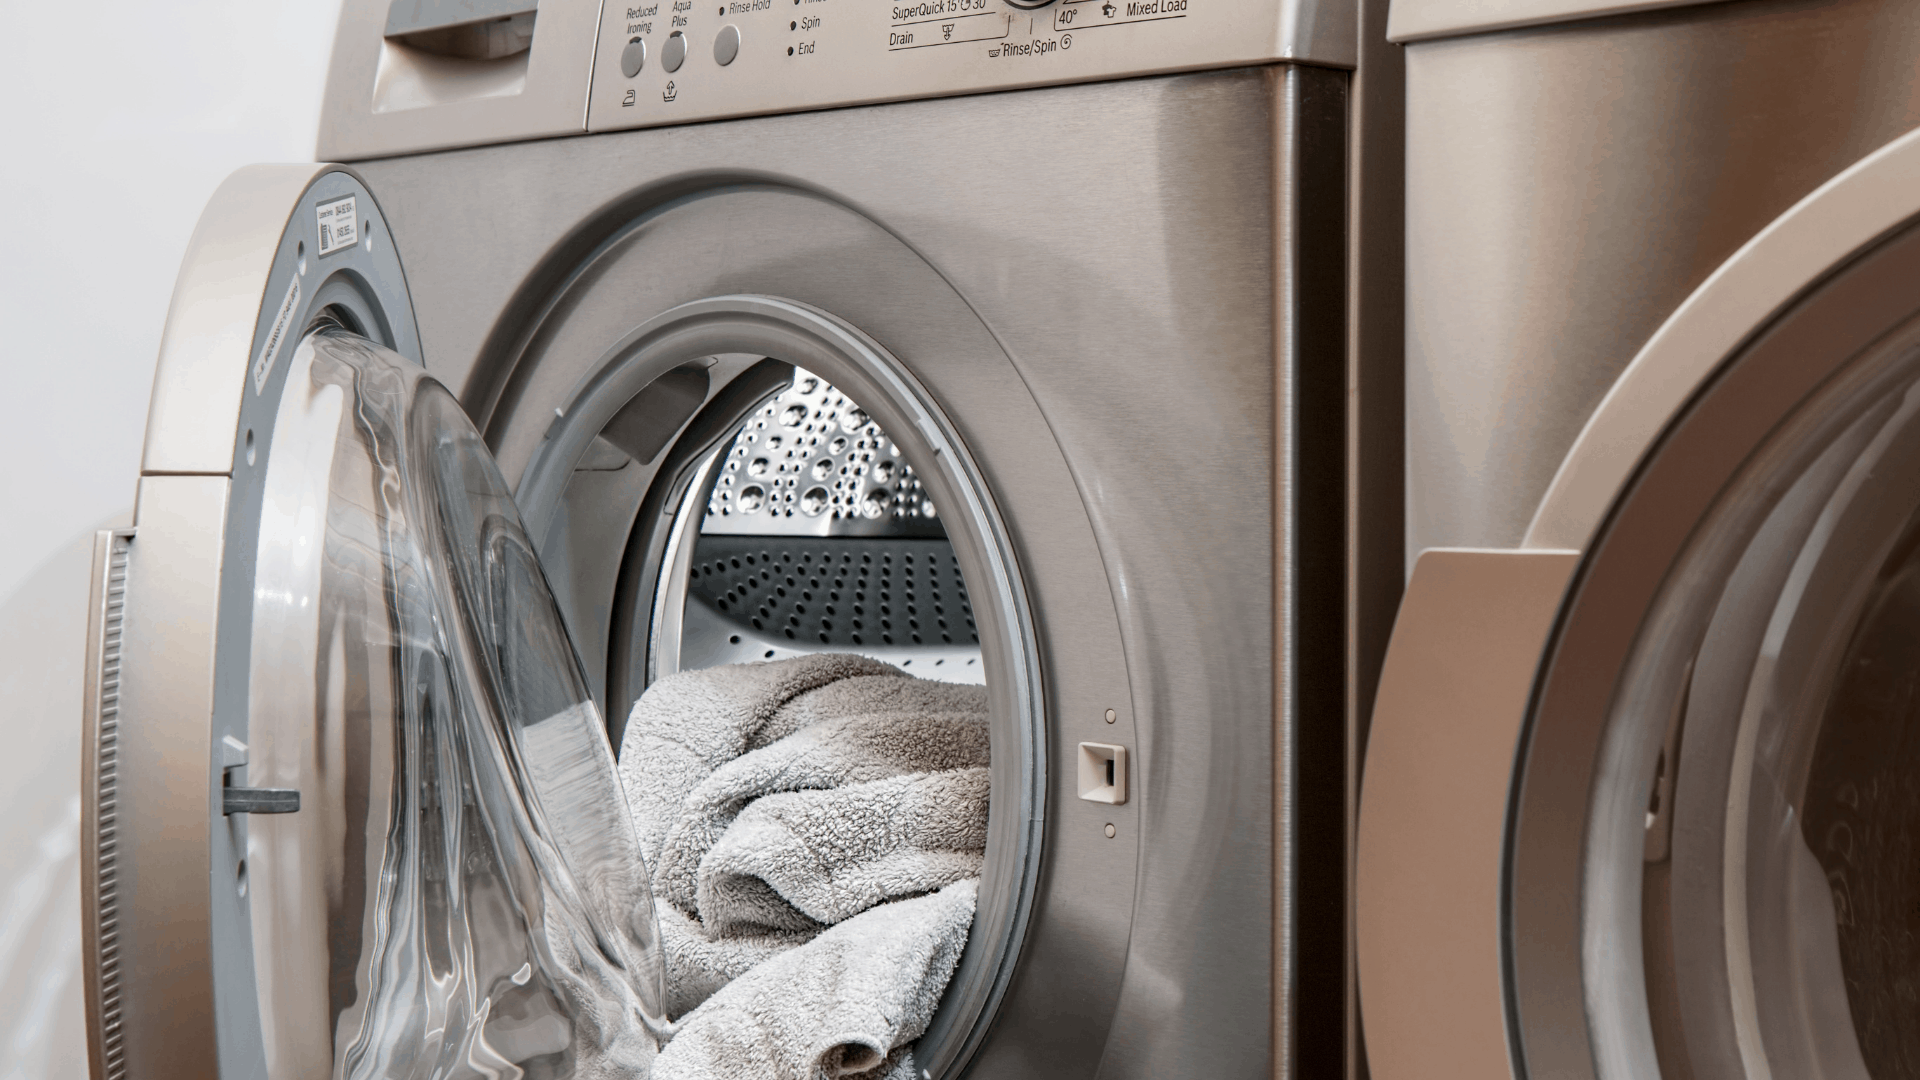 How Long Does a Dryer Take to Dry Clothes?